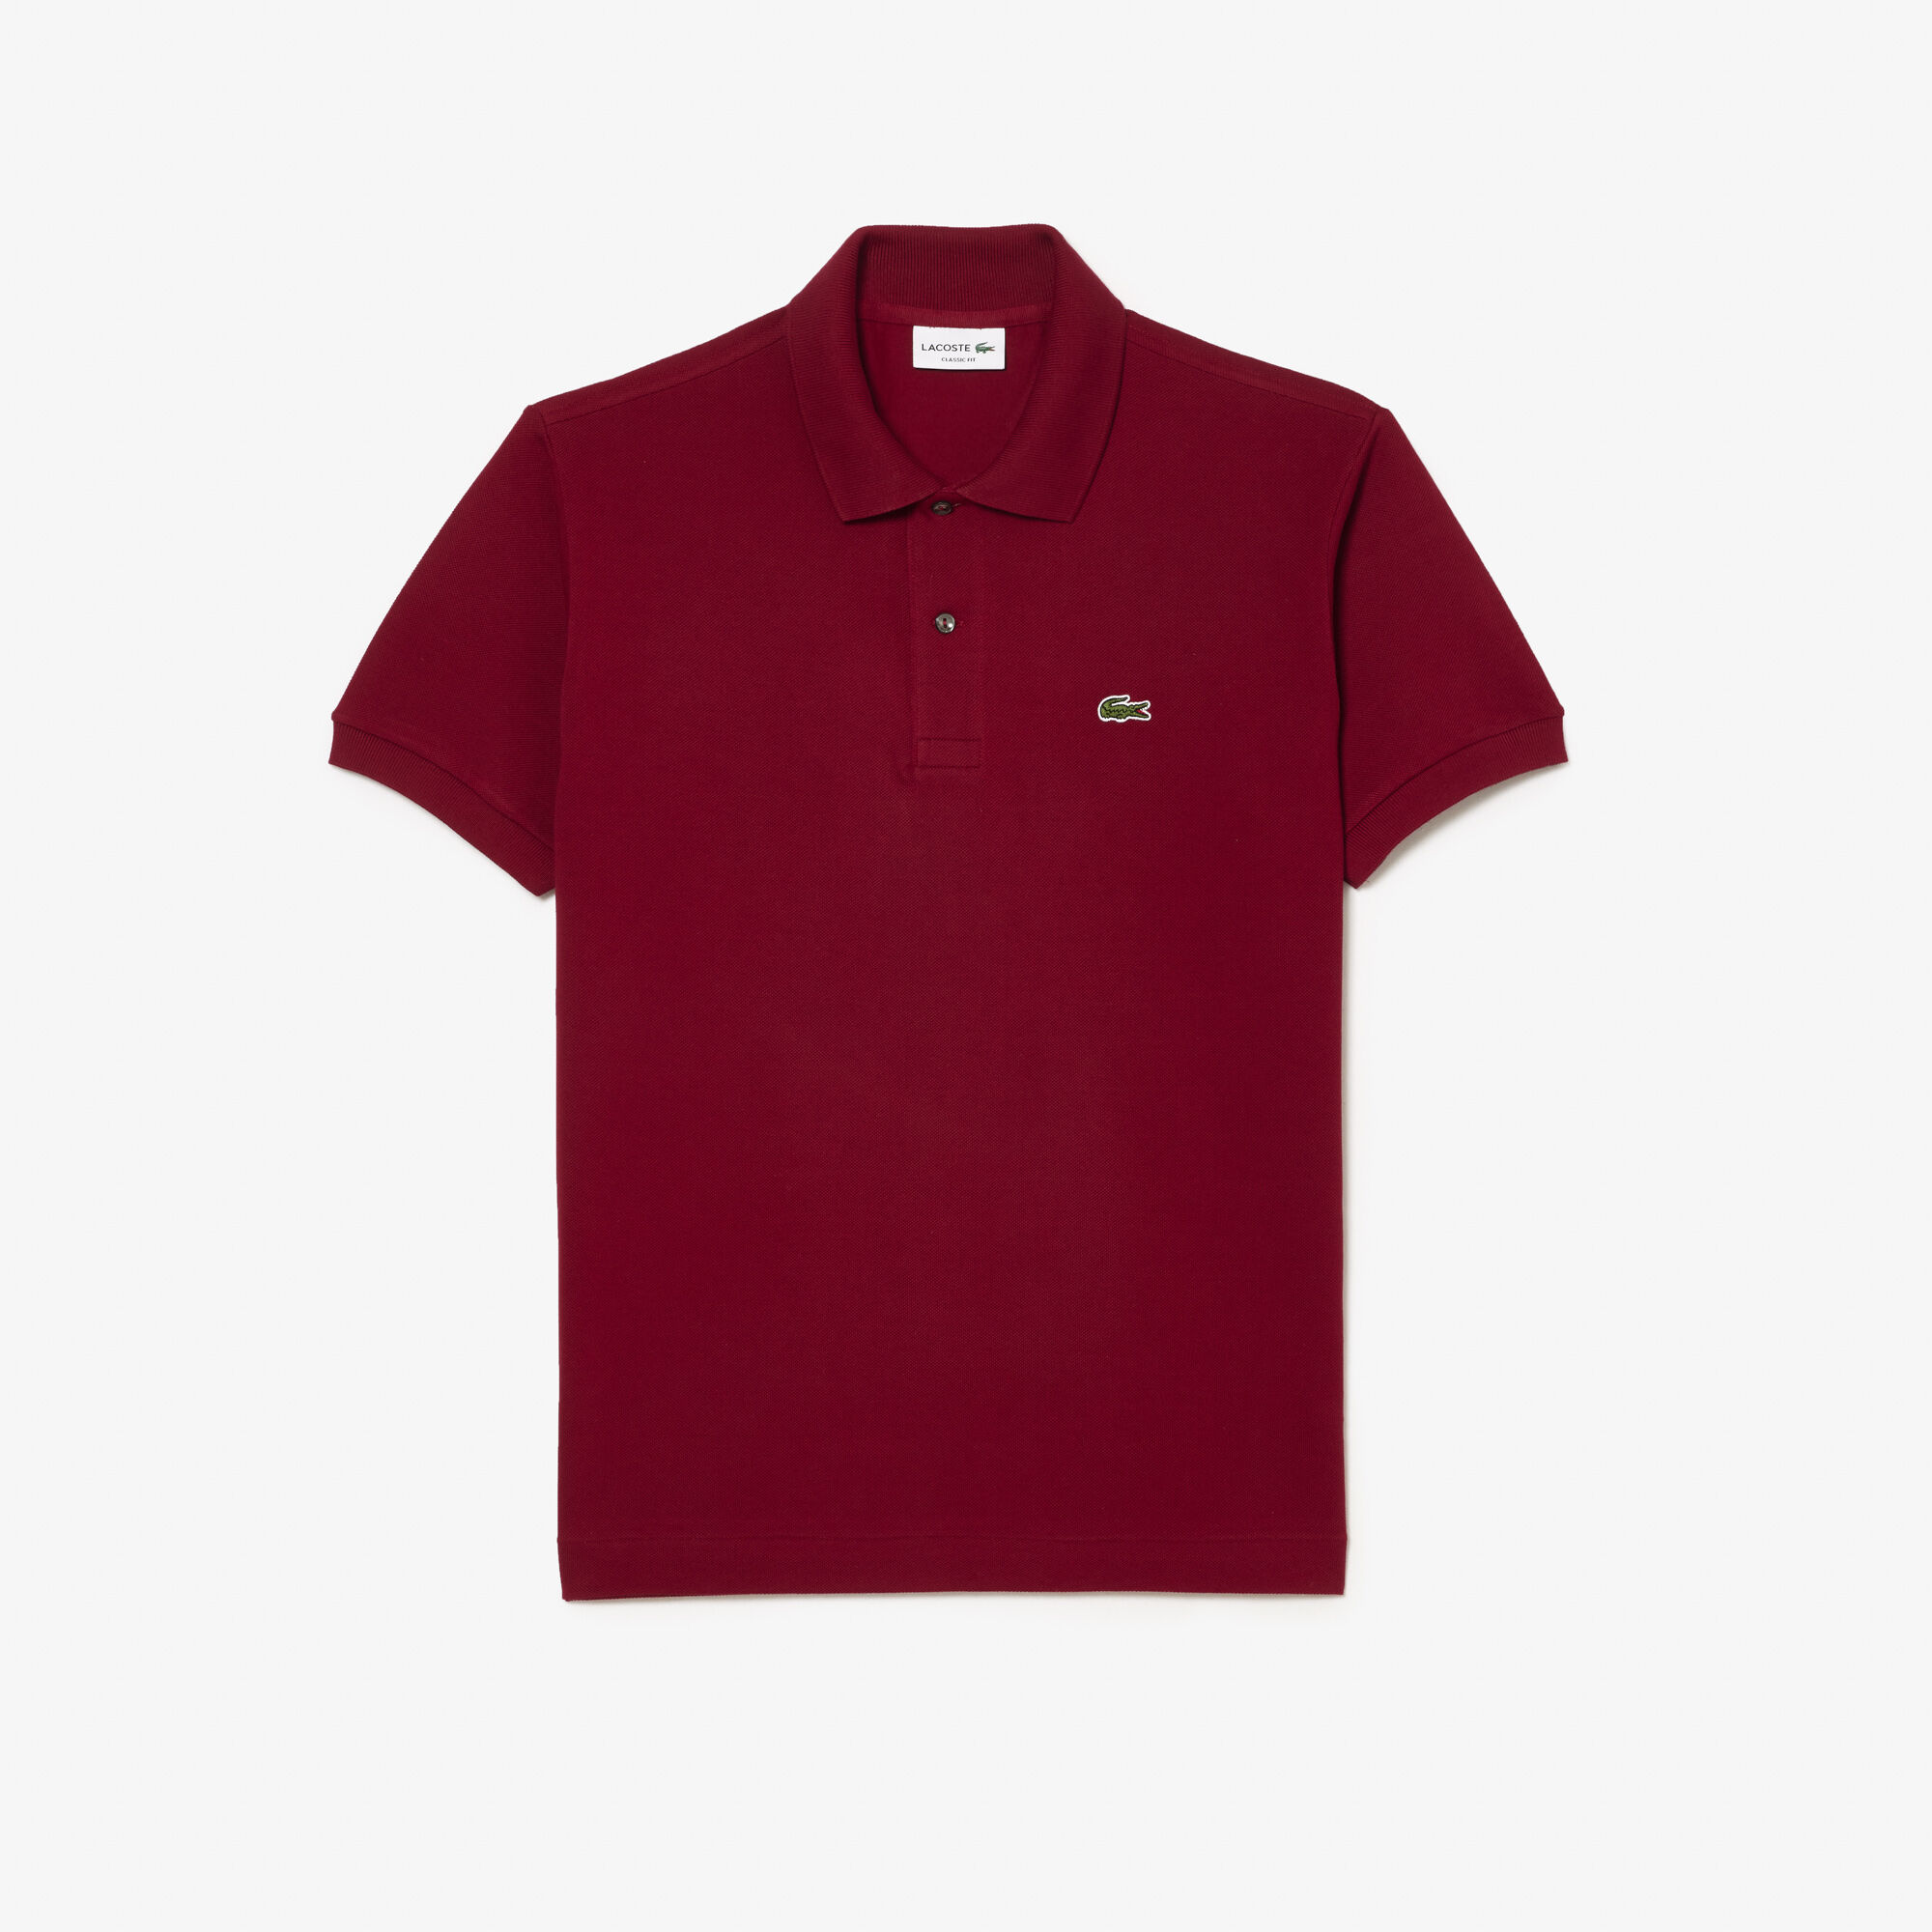 lacoste t shirt how much,Save up to 15%,www.ilcascinone.com